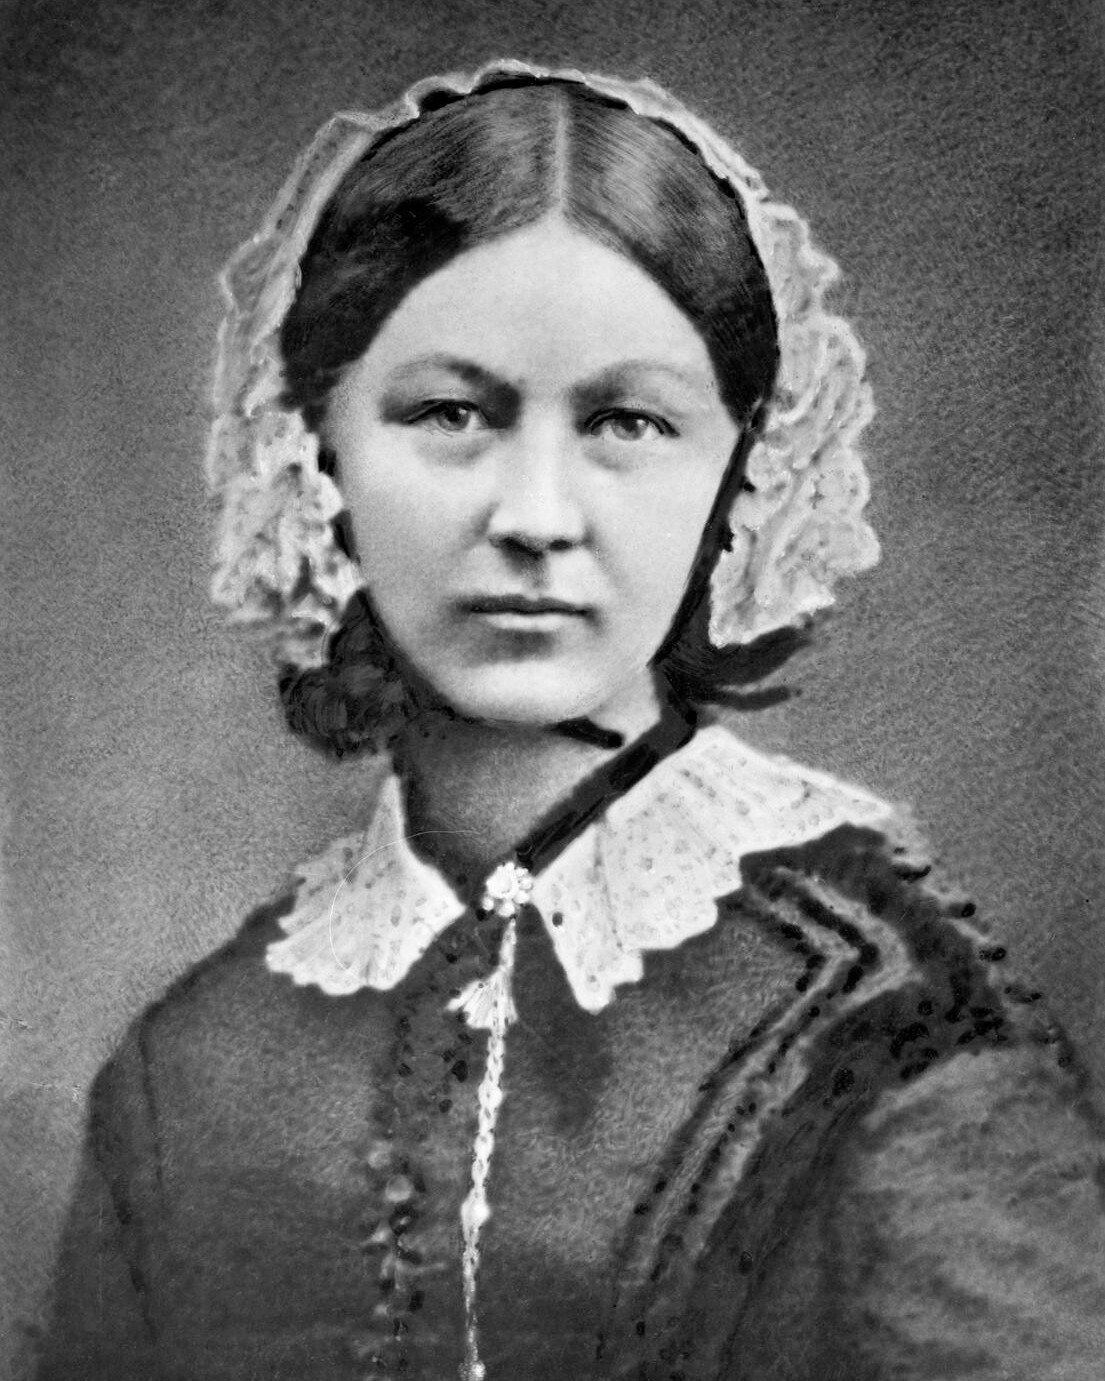 Florence Nightingale, the mother of modern nursing, was born today in 1820 &quot;The Lady with the Lamp&quot; is honored as a chapter namesake in @DBEinAZ | Image: &quot;Florence Nightingale by Henry Hering&quot; currently in the collection of @natio